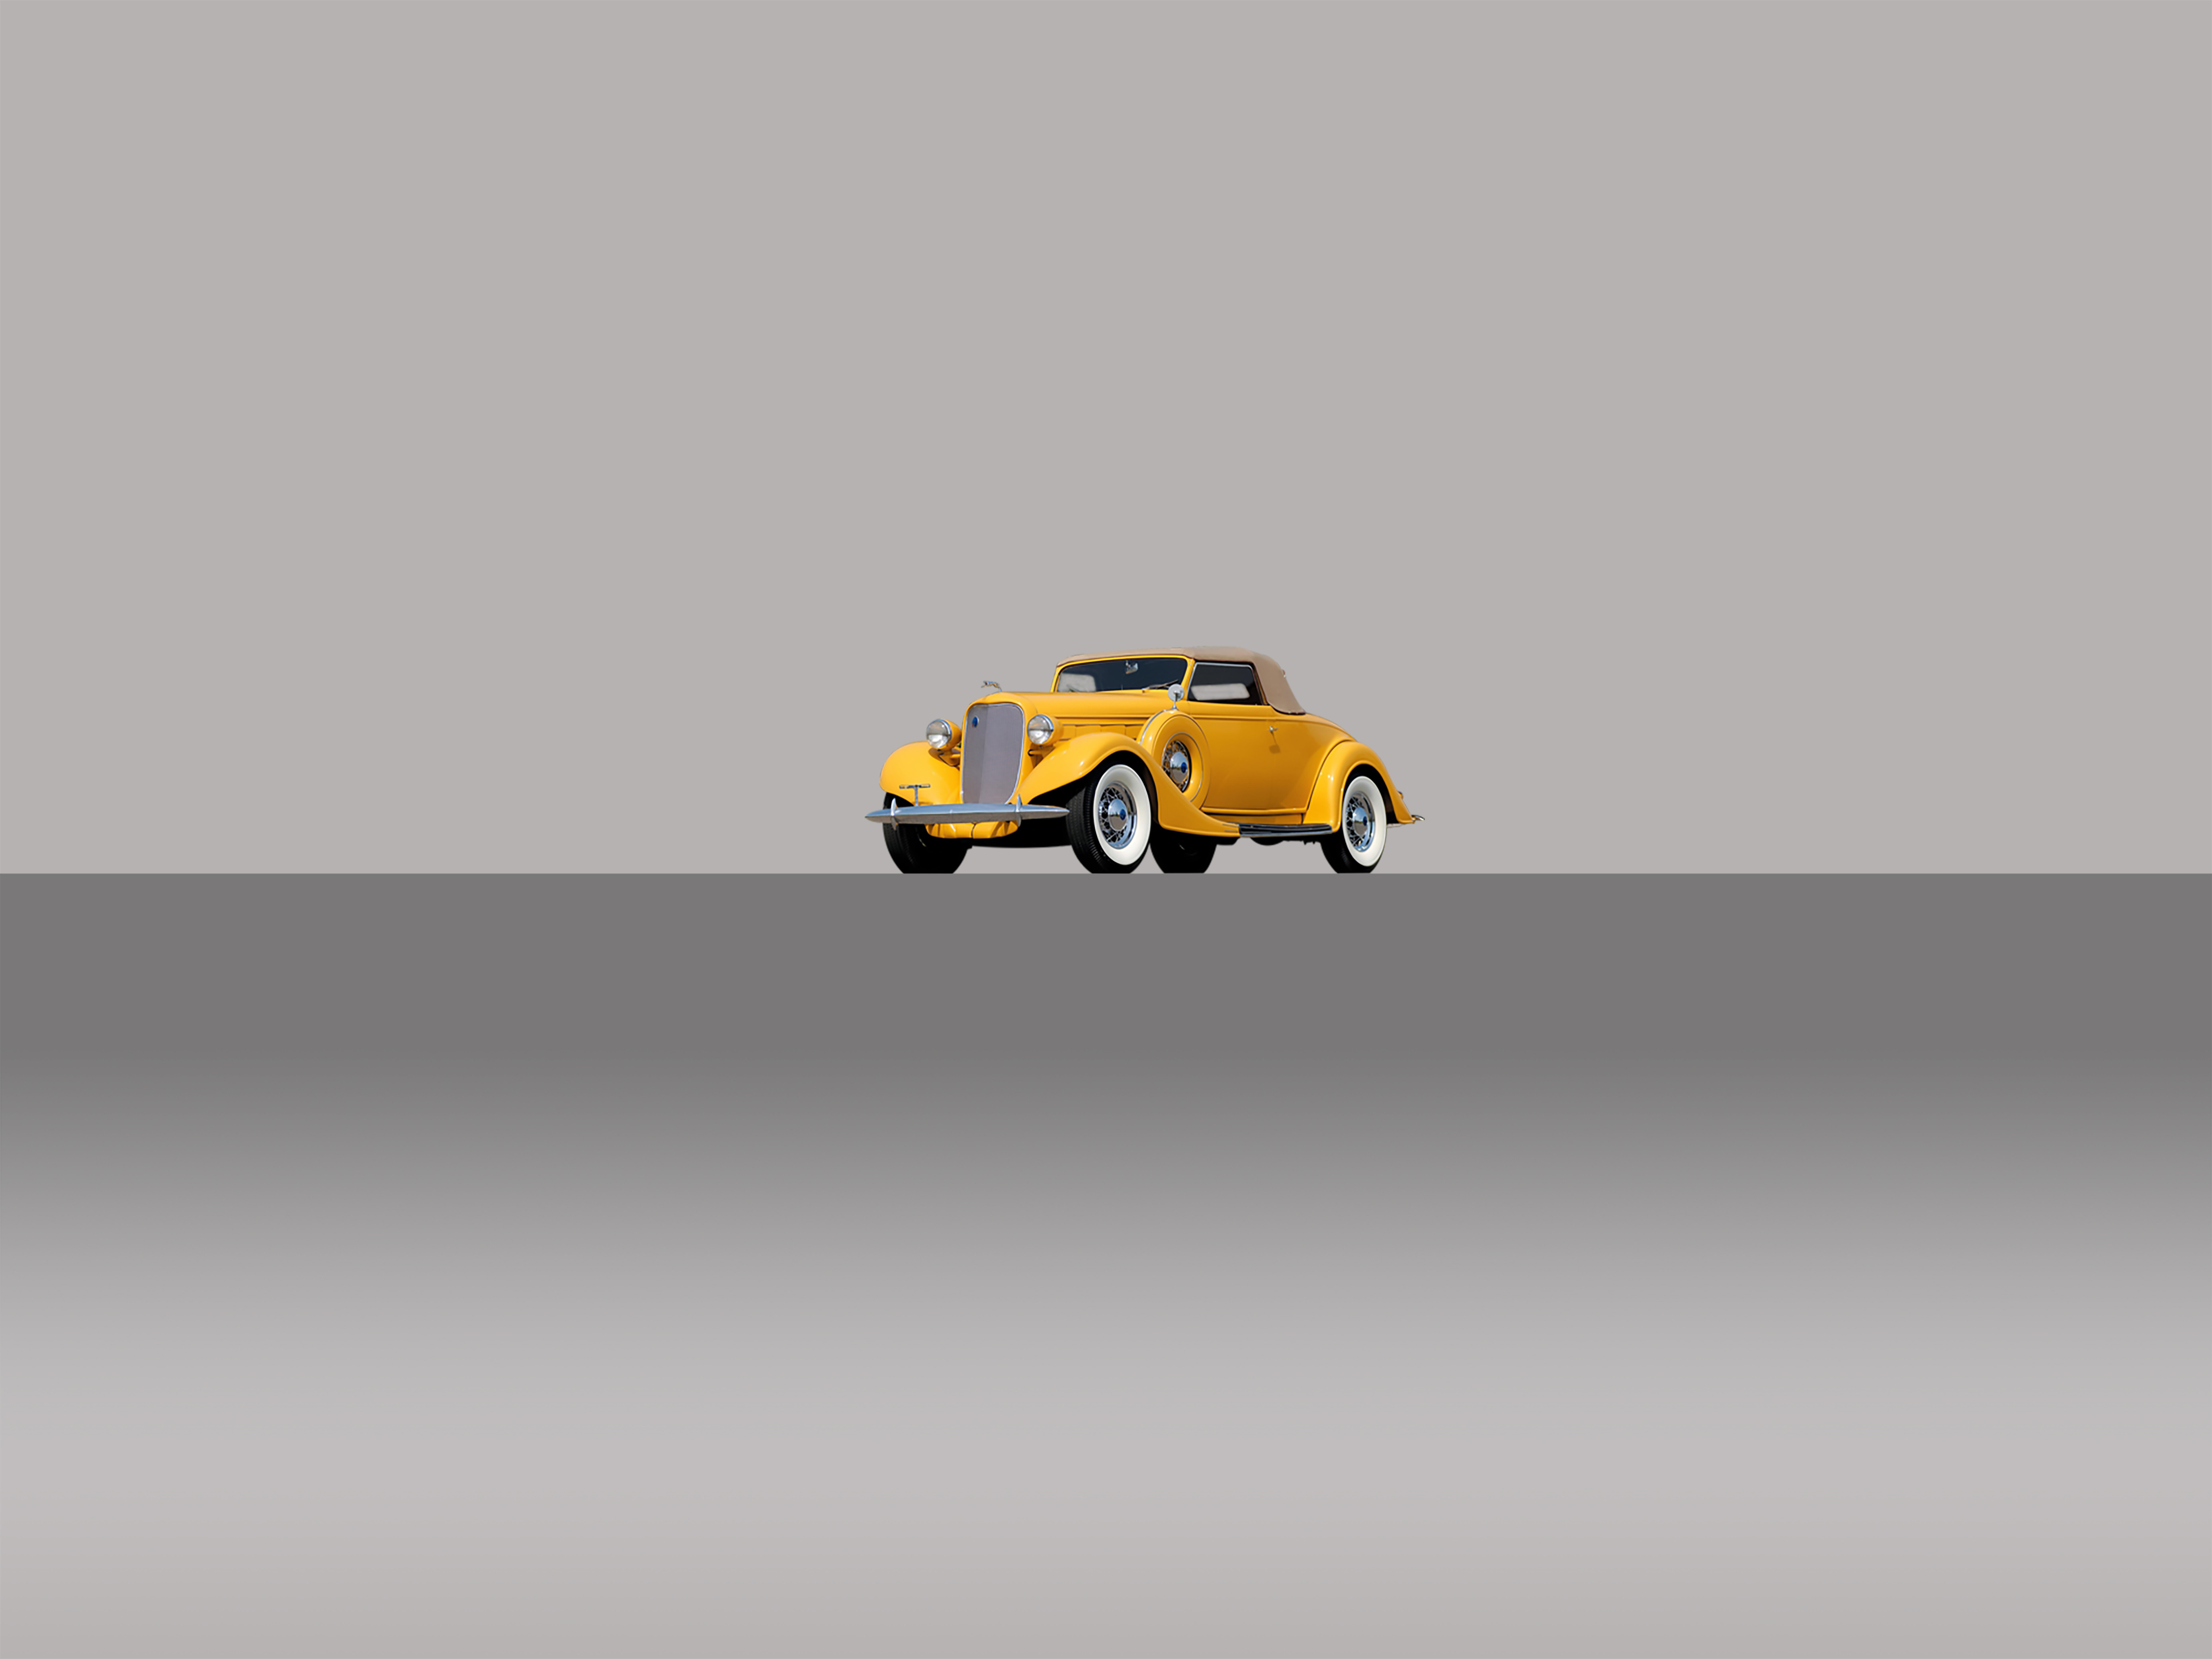 Car Old Car Yellow Cars Minimalism Lincoln 1937 Lincoln Zephyr Lincoln Continental 5556x4167